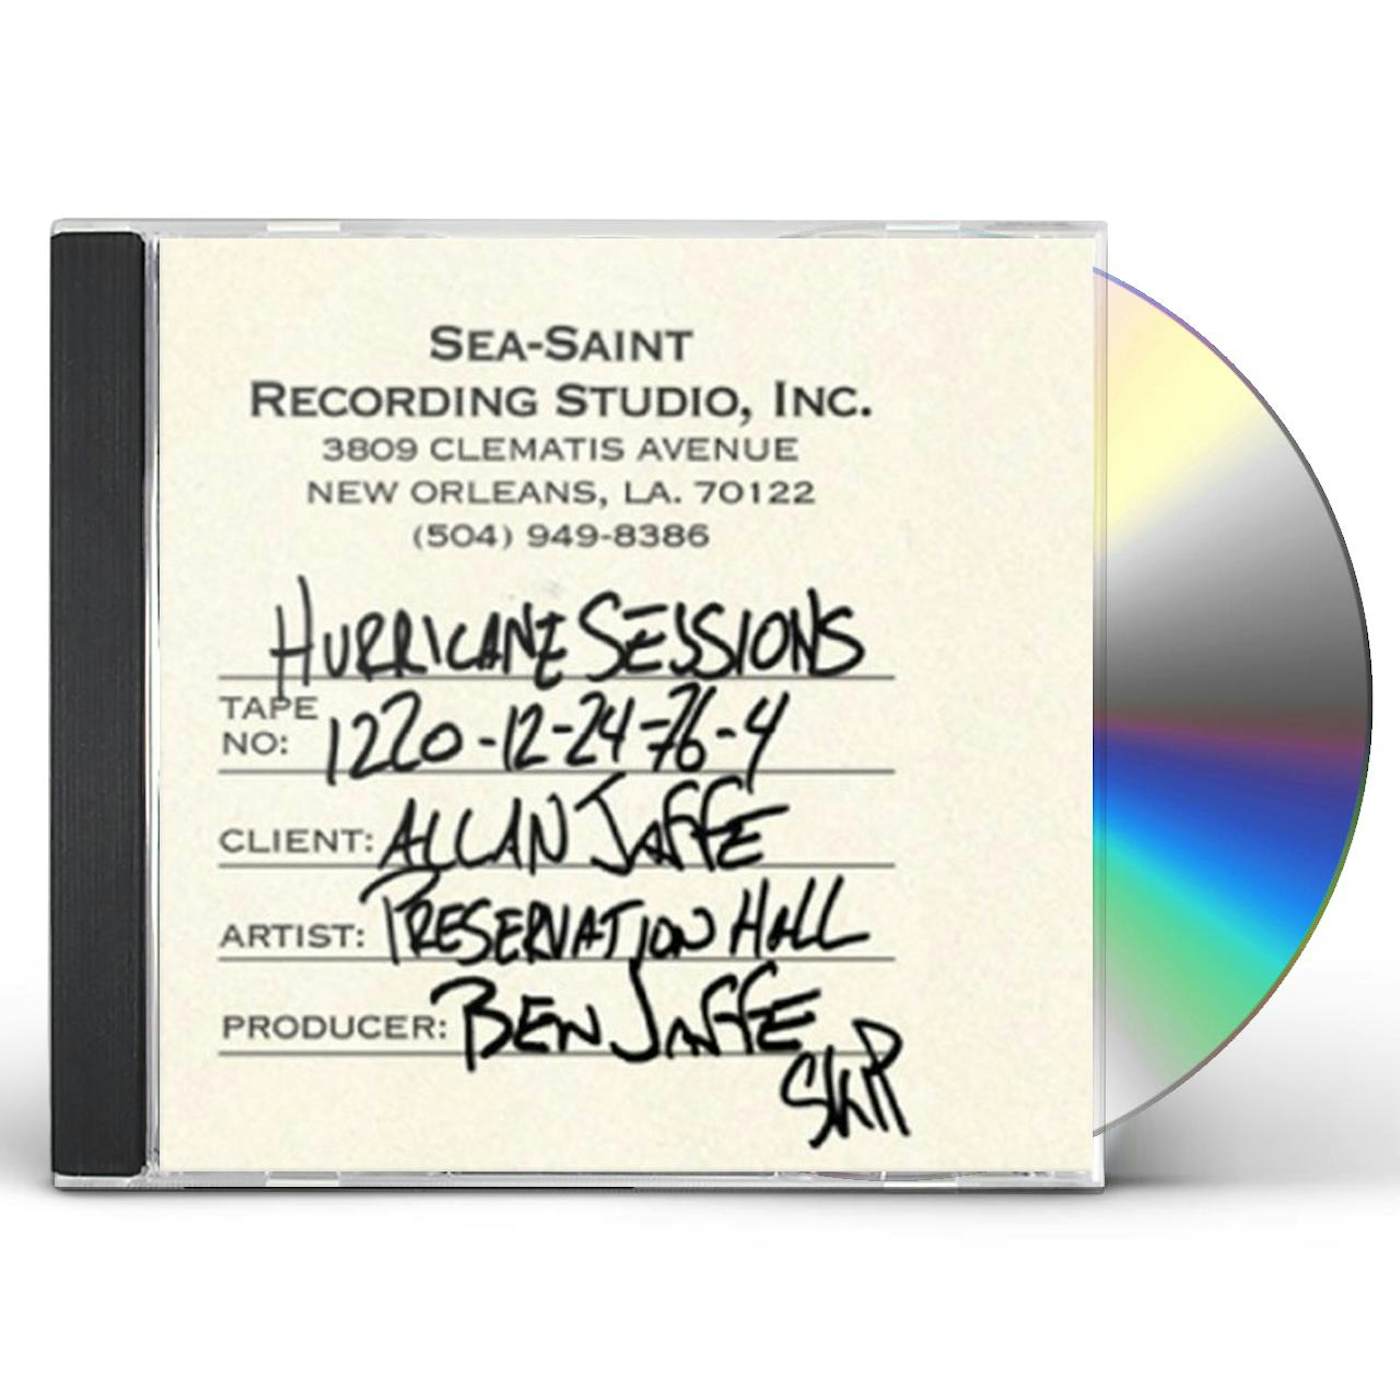 Preservation Hall Jazz Band HURRICANE SESSIONS CD